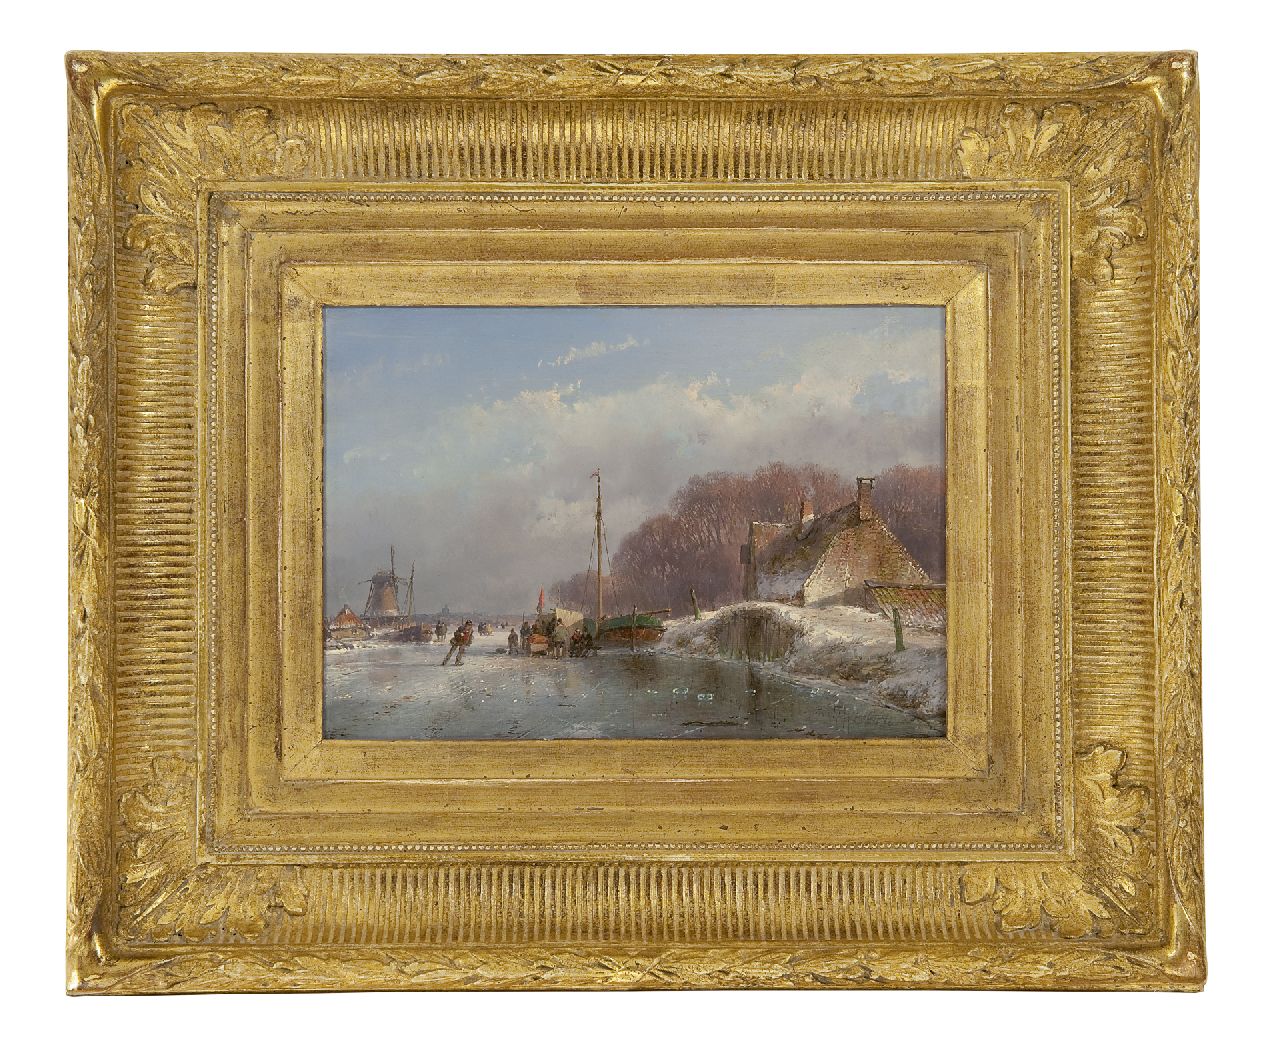 Schelfhout A.  | Andreas Schelfhout, A winter landscape with a koek-en-zopie, oil on panel 17.0 x 24.1 cm, signed l.r. and painted circa 1860